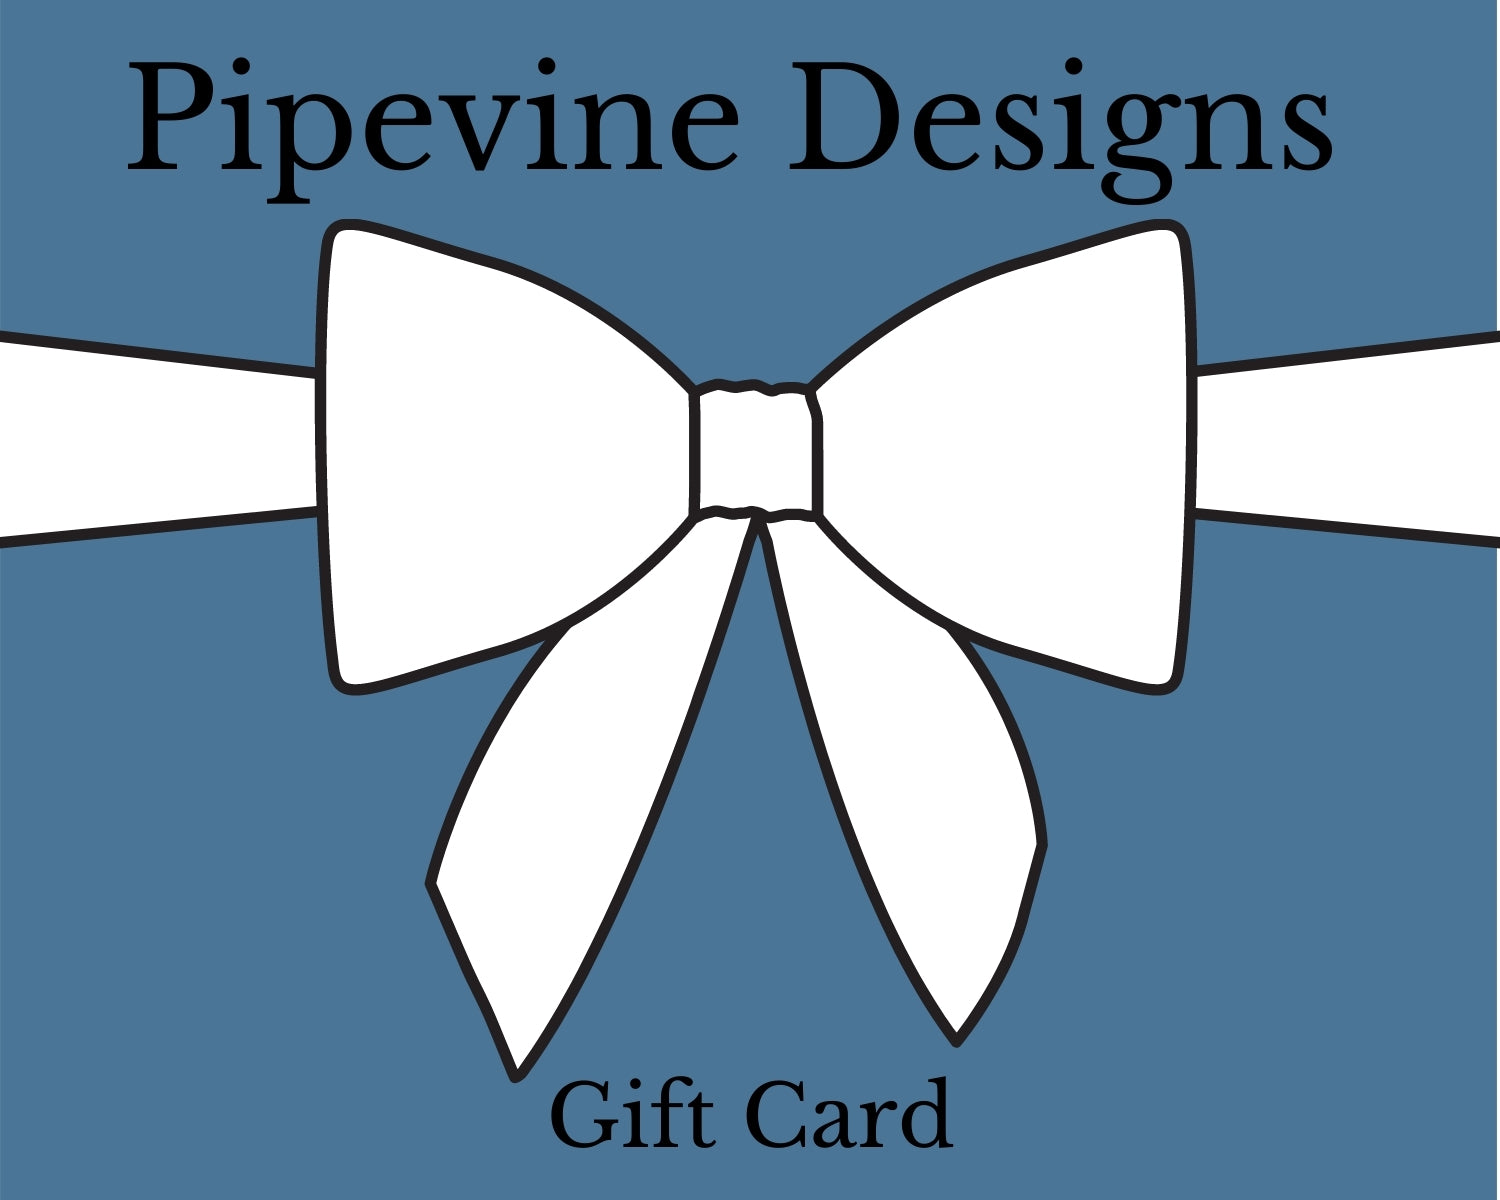 Pipevine Designs Gift Card